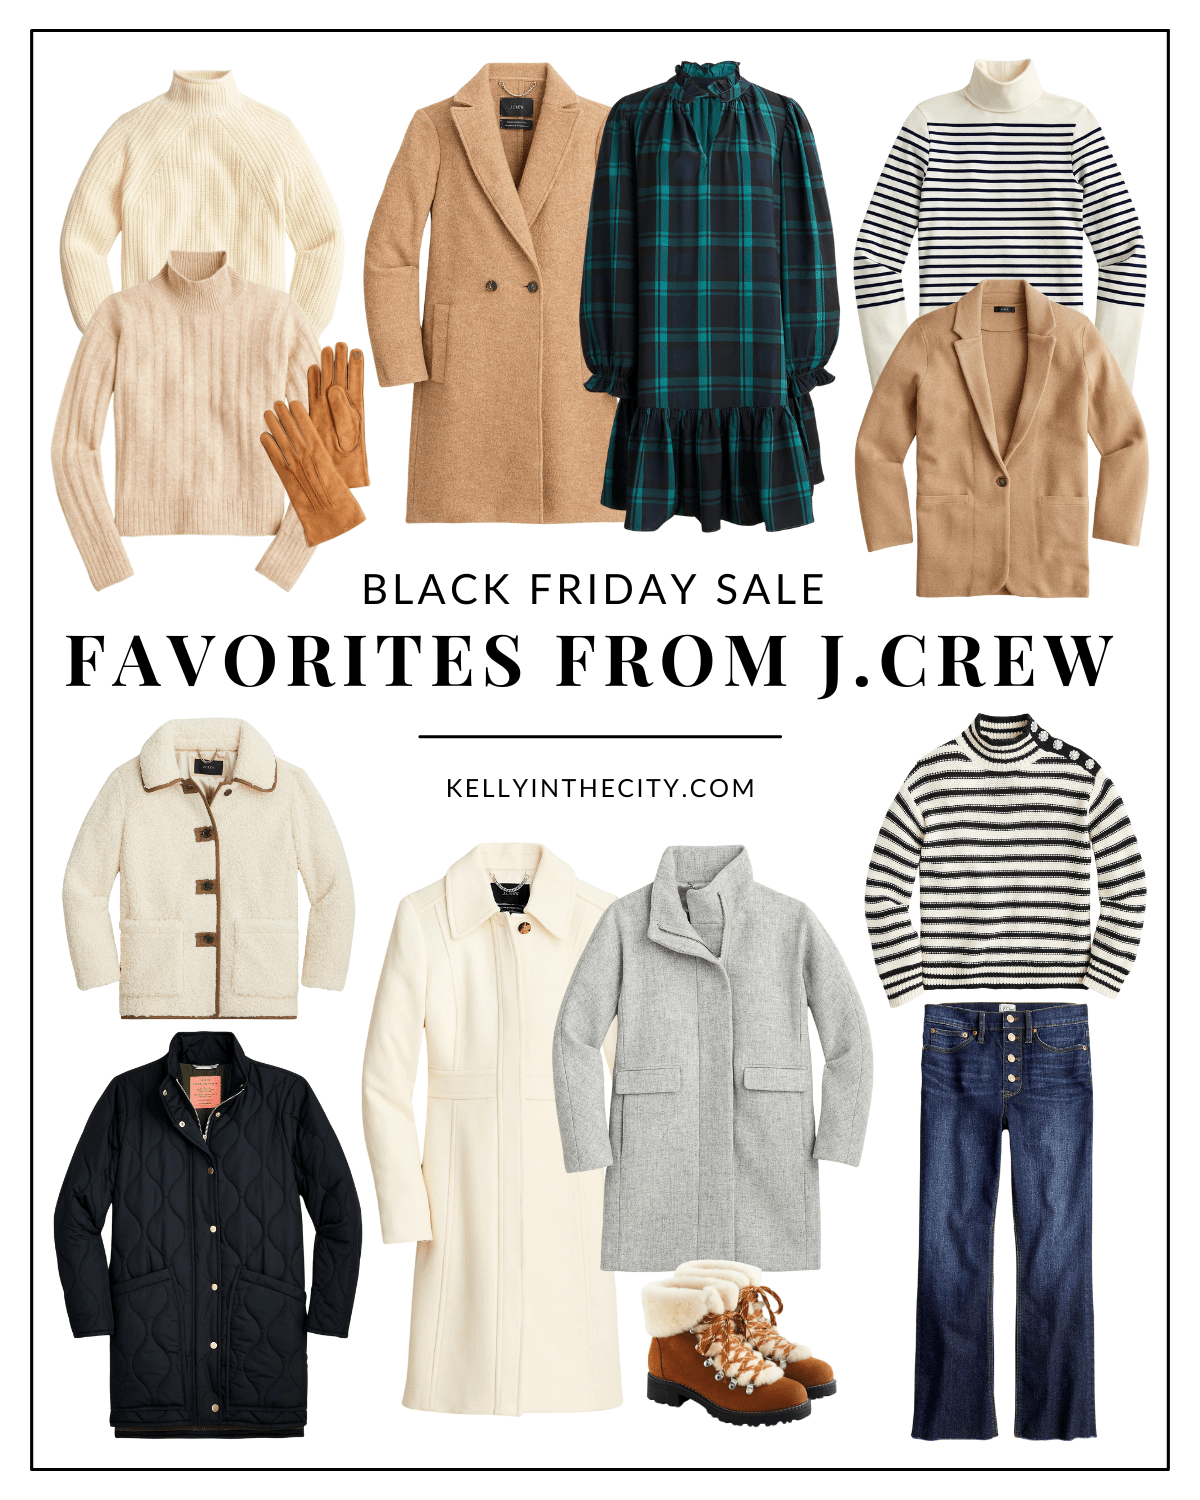 Black Friday Sale Favorites from J.Crew